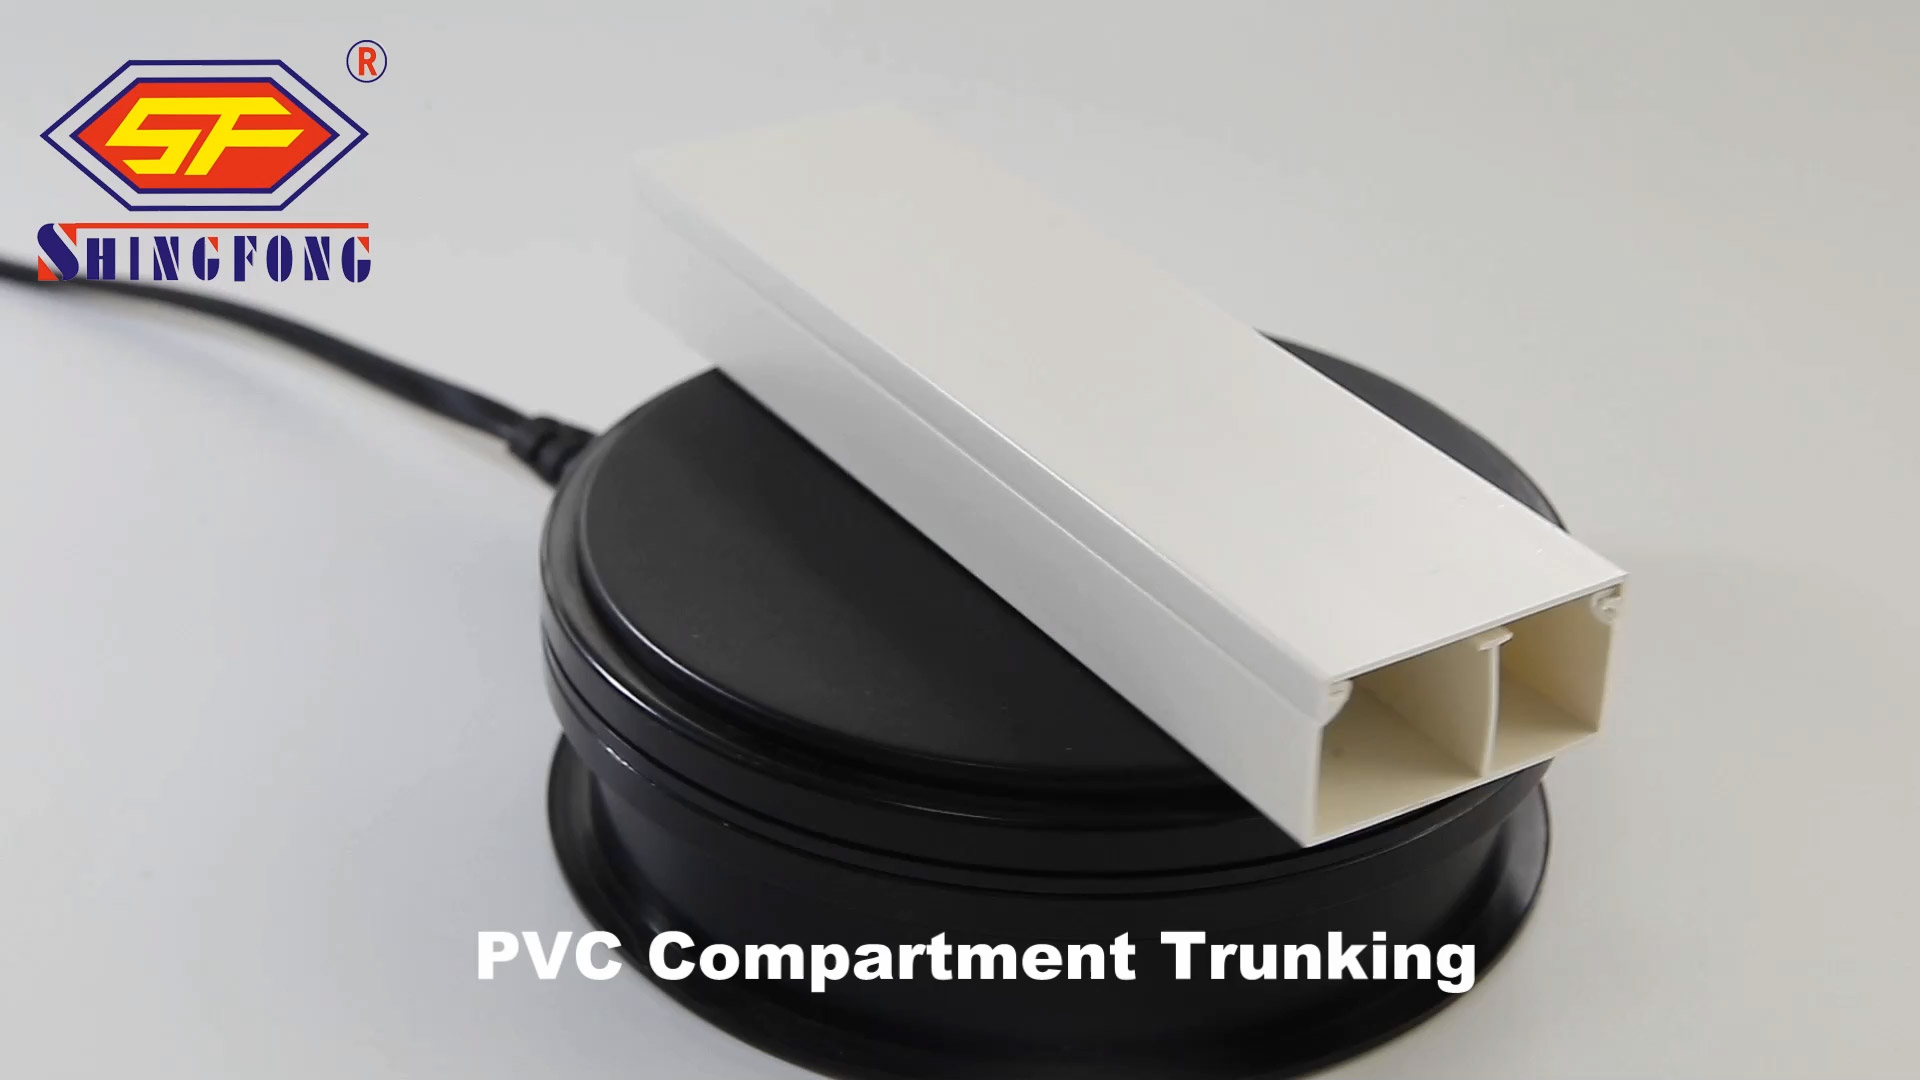 Customized PVC Compartment Trunking manufacturers From China